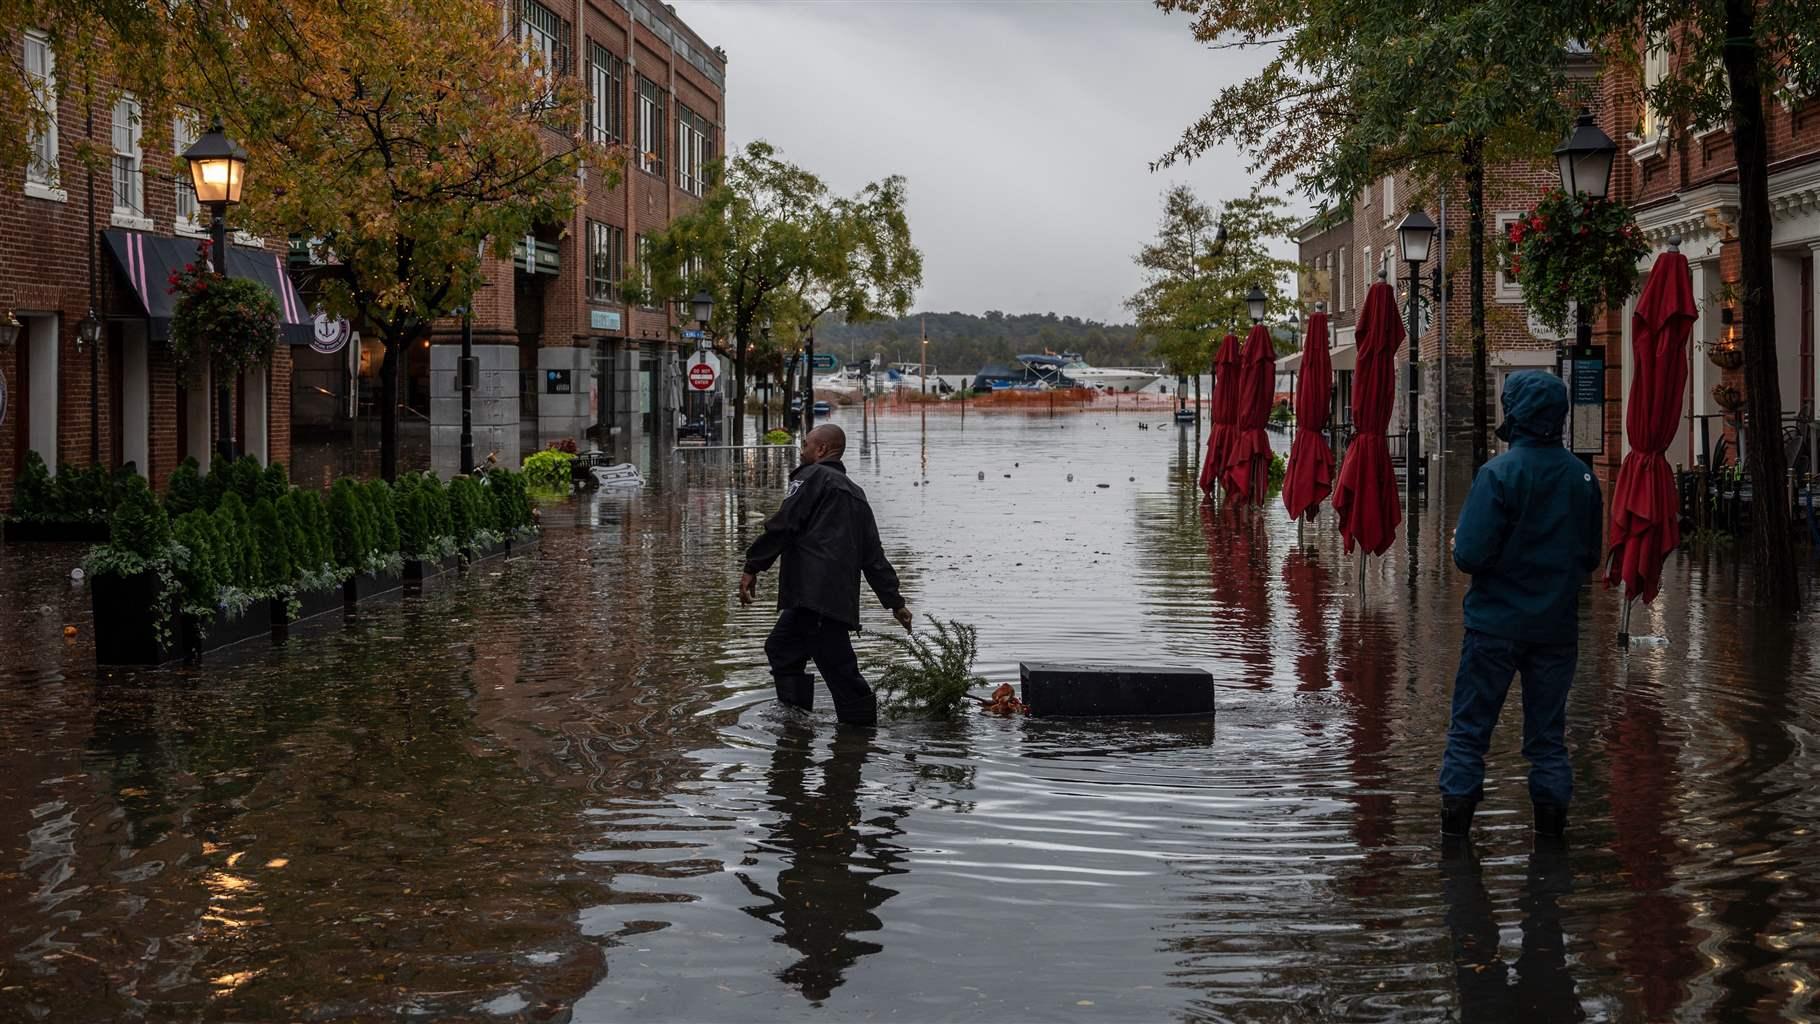 A police officer pulls a potted plant across a flooded street near a bar in Old Town Alexandria, Virginia, on October 29, 2021.